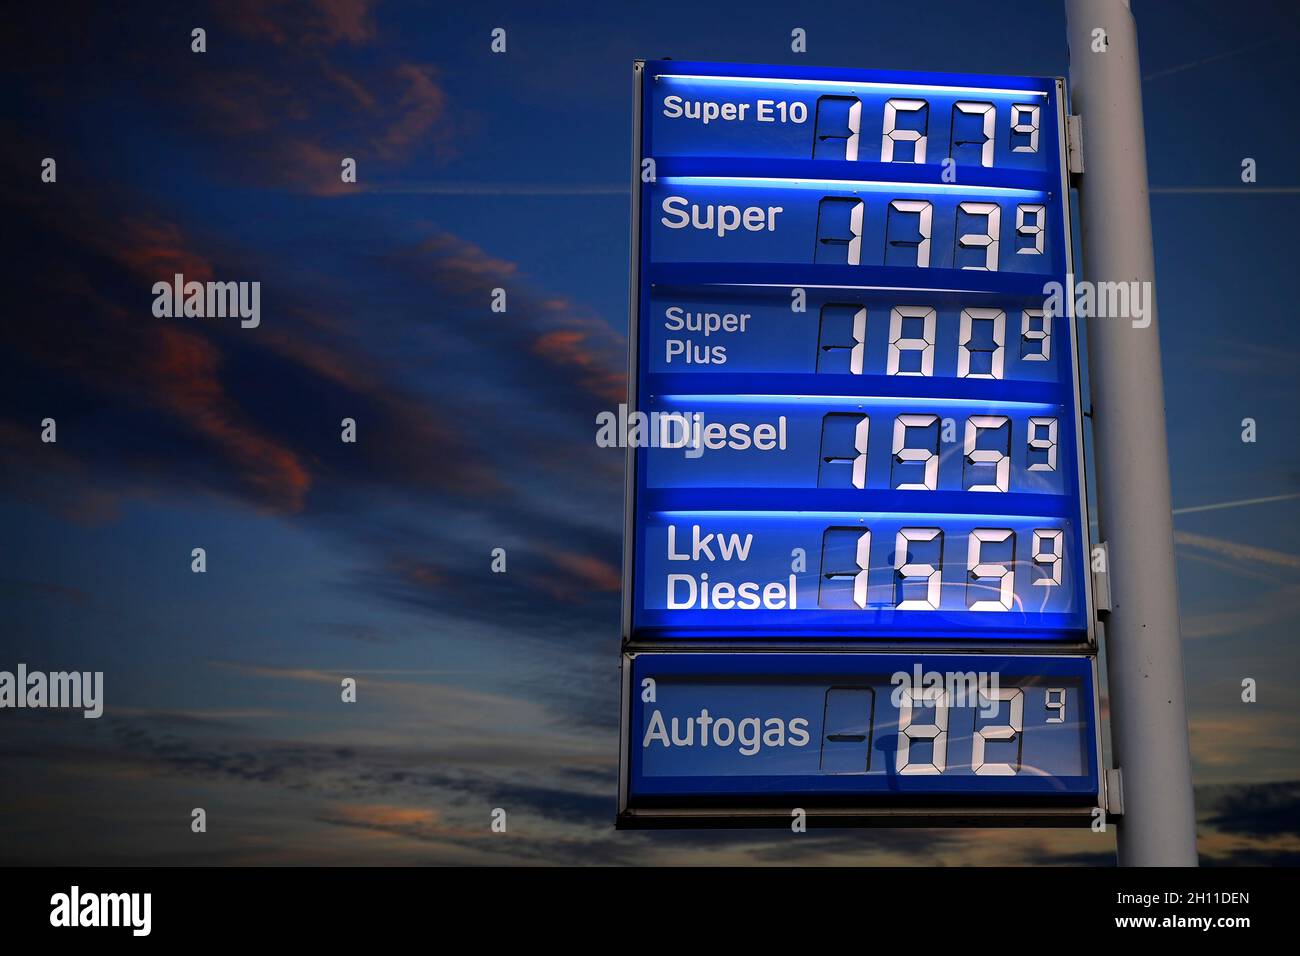 Munich, Germany. 15th Oct, 2021. Gasoline prices at record levels. Credit:  dpa/Alamy Live News Stock Photo - Alamy